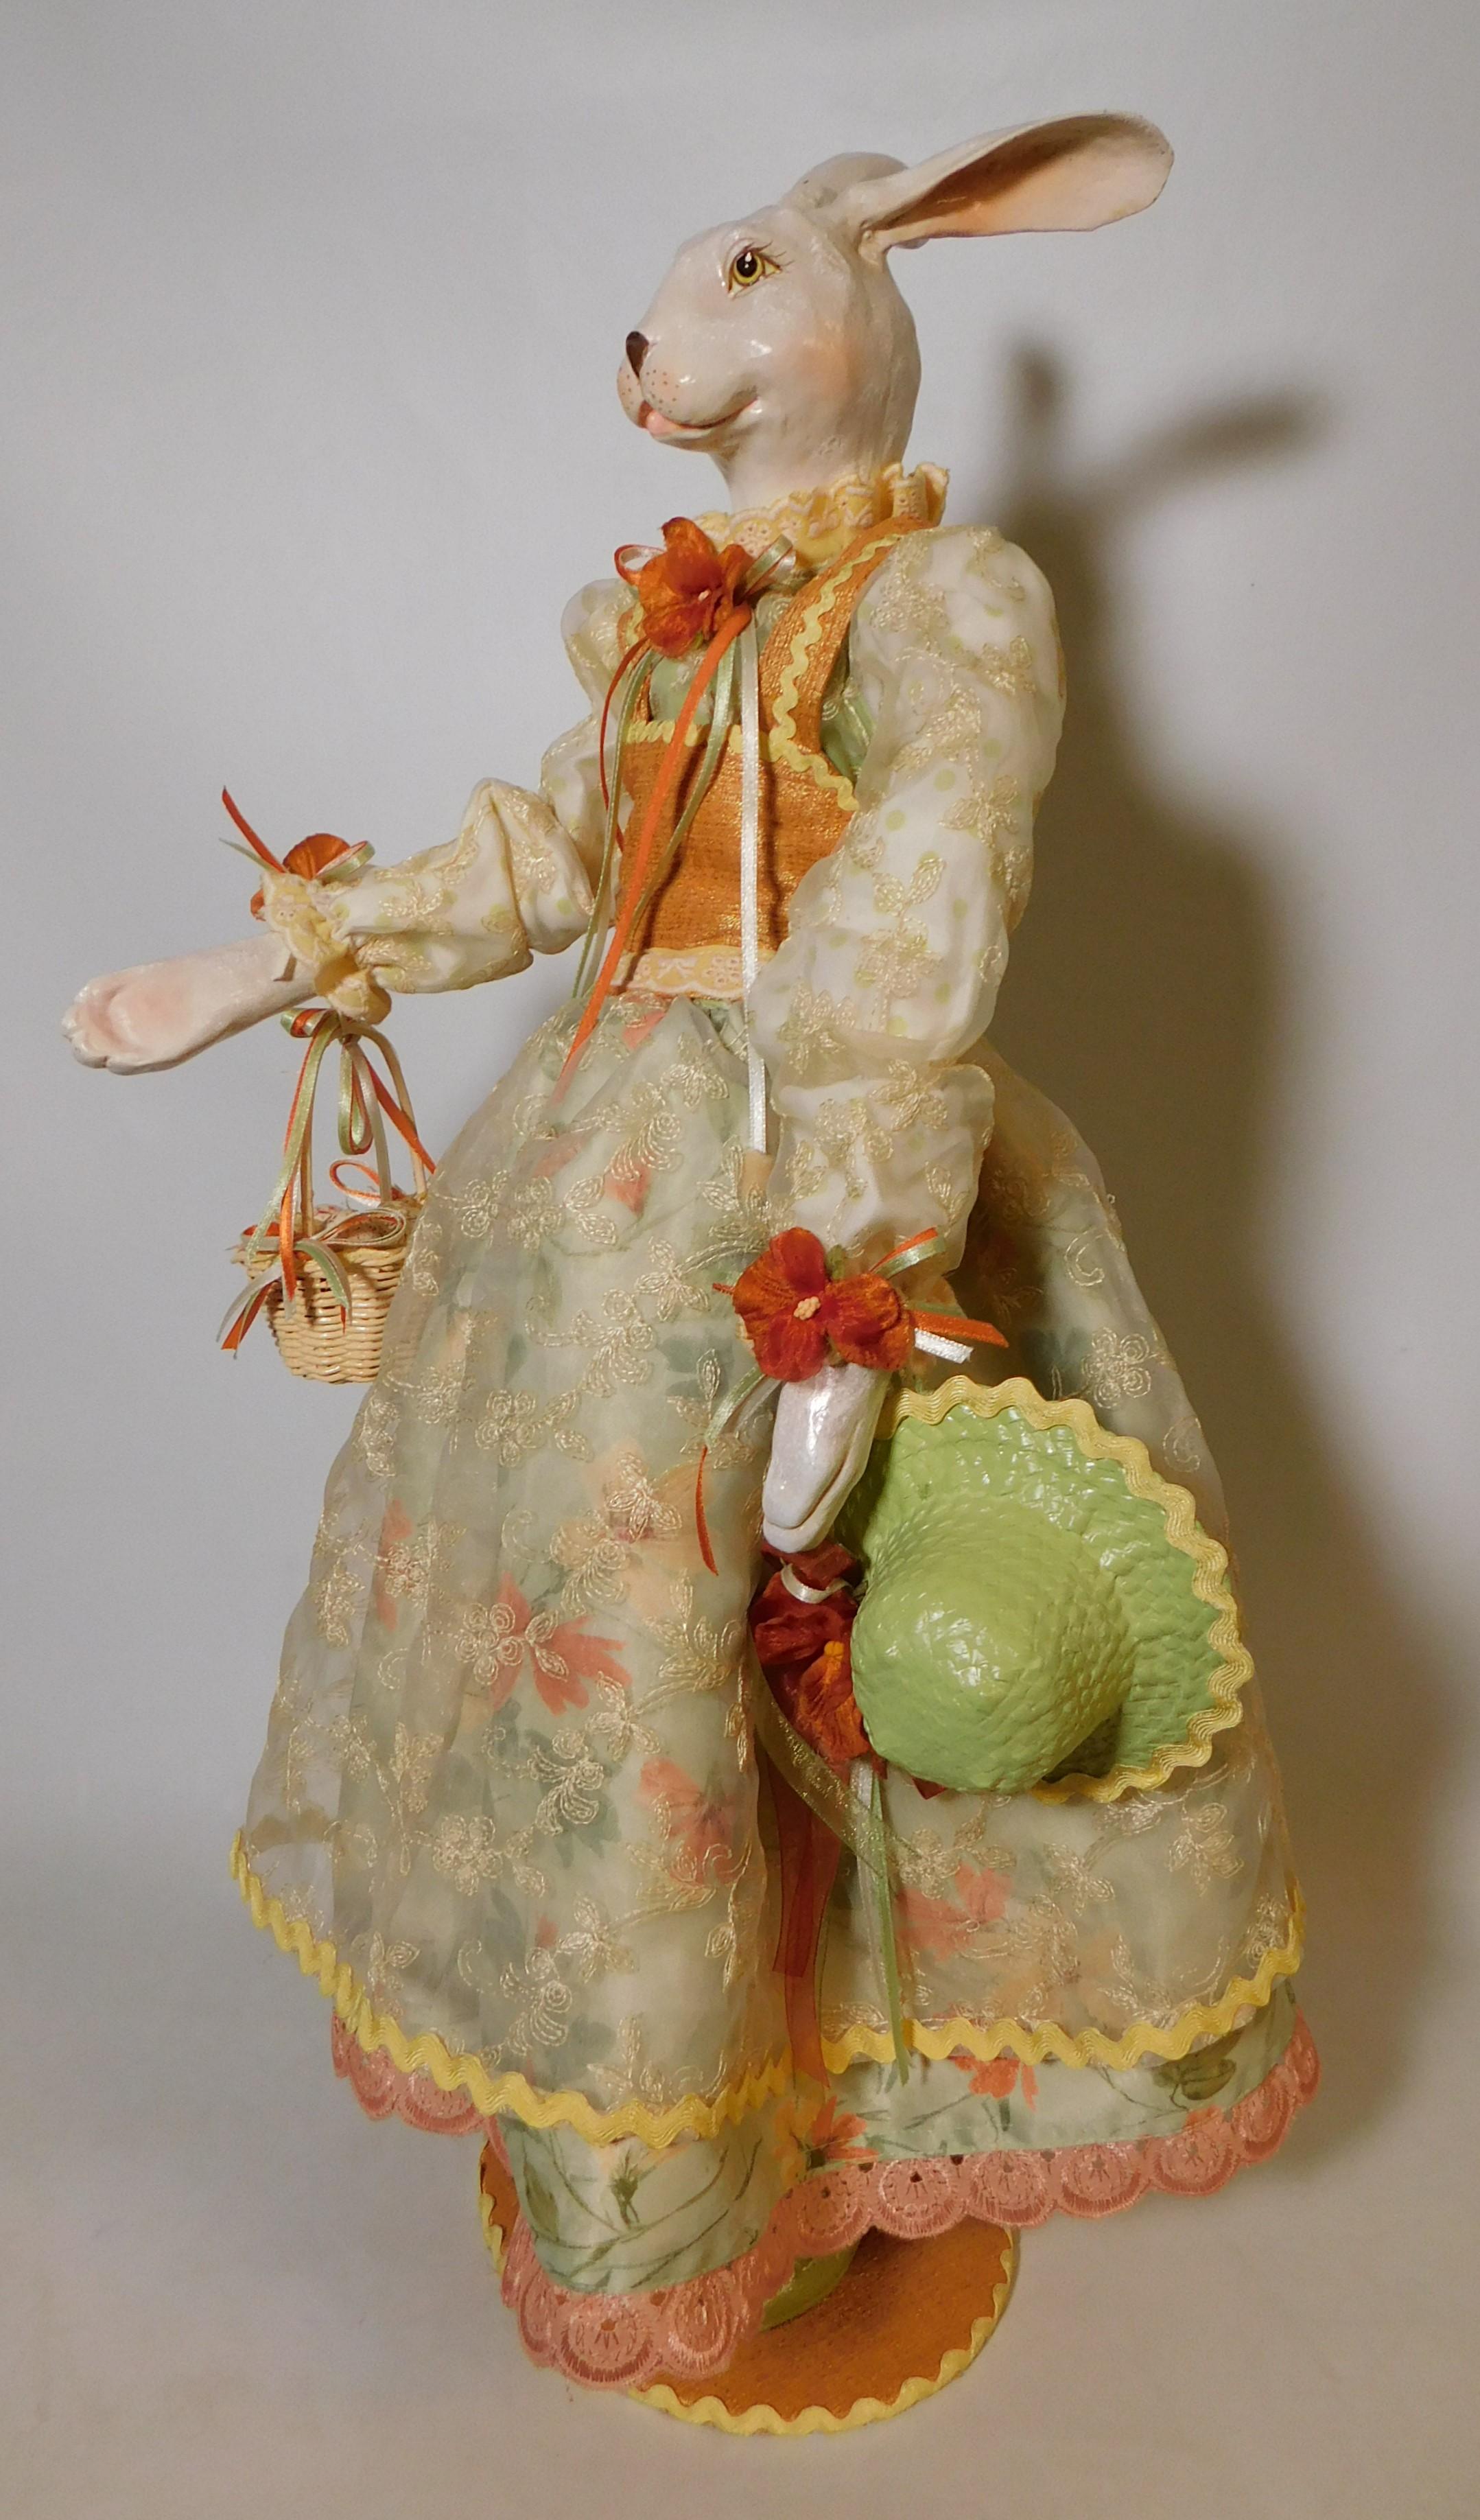 Store display rabbit over two feet high holding a basket with eggs in one hand and an Easter bonnet in the other. The hare appears to be made of a papier-mâché/fiberglass composition.